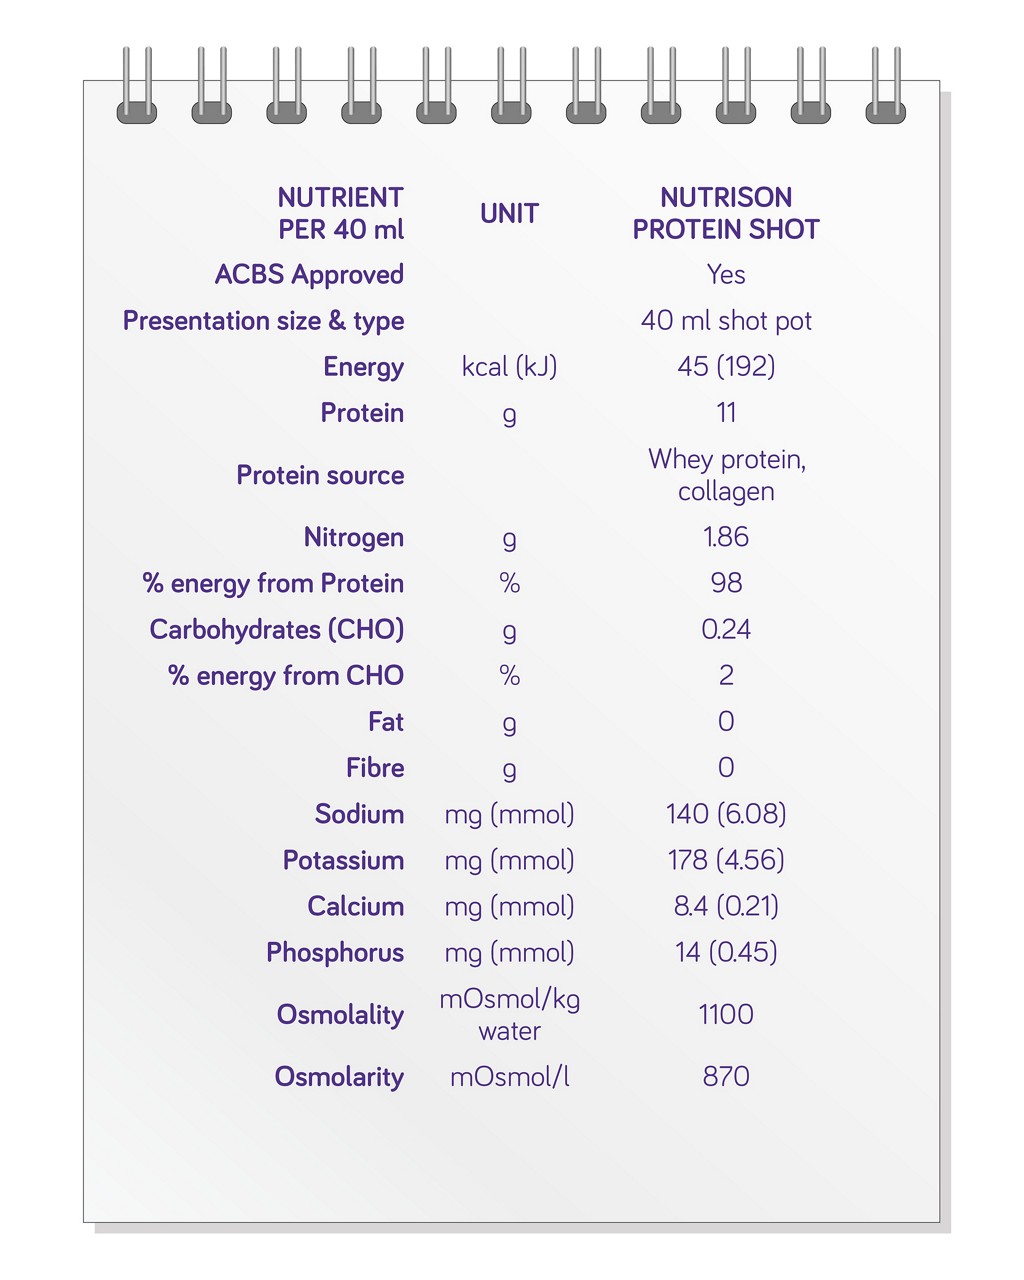 nutrison-protein-shot-nutrient-table-acbs